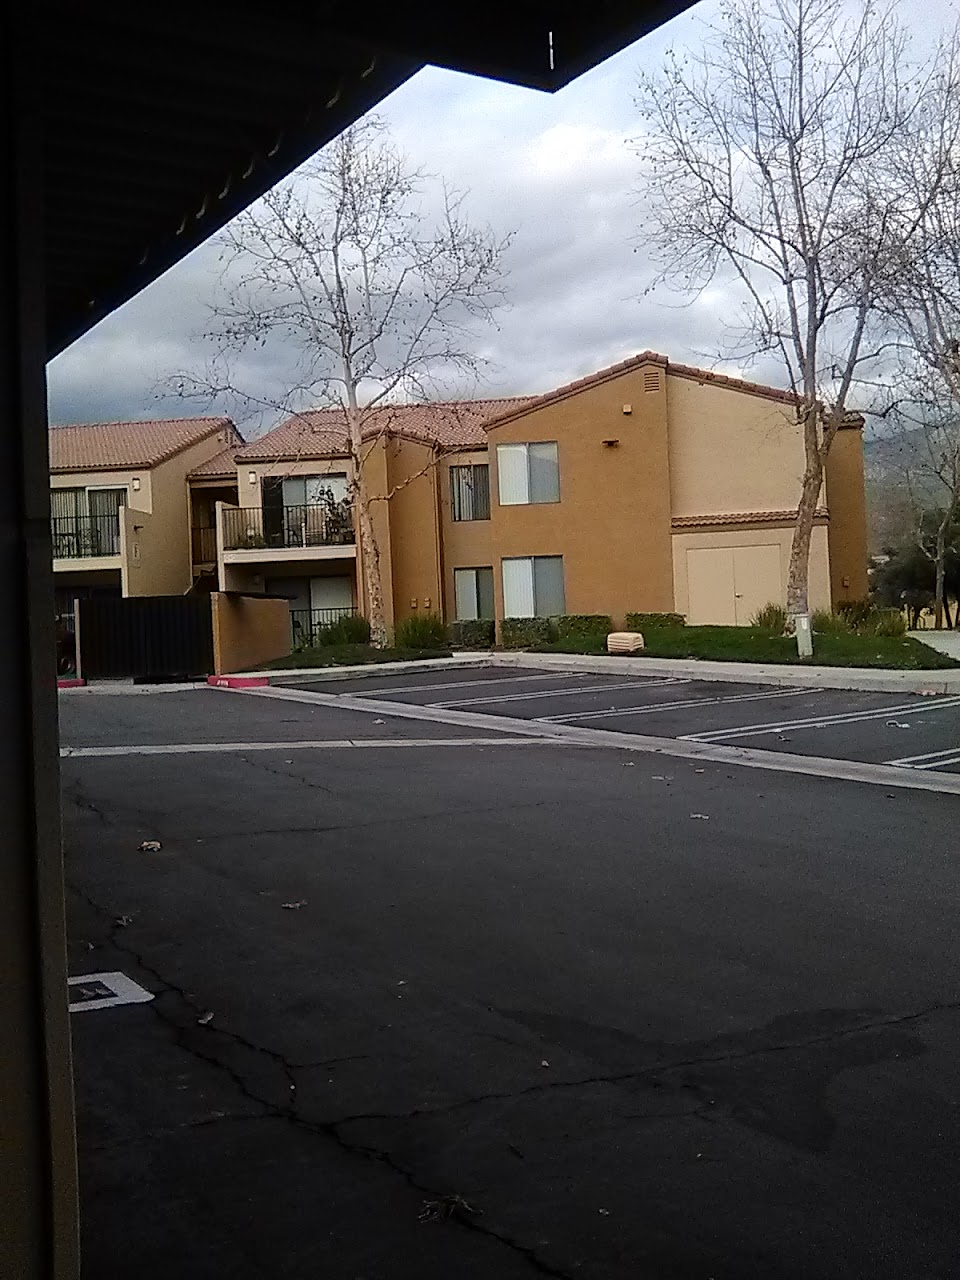 Photo of VINTAGE AT KENDALL. Affordable housing located at 1095 KENDALL DR SAN BERNARDINO, CA 92407